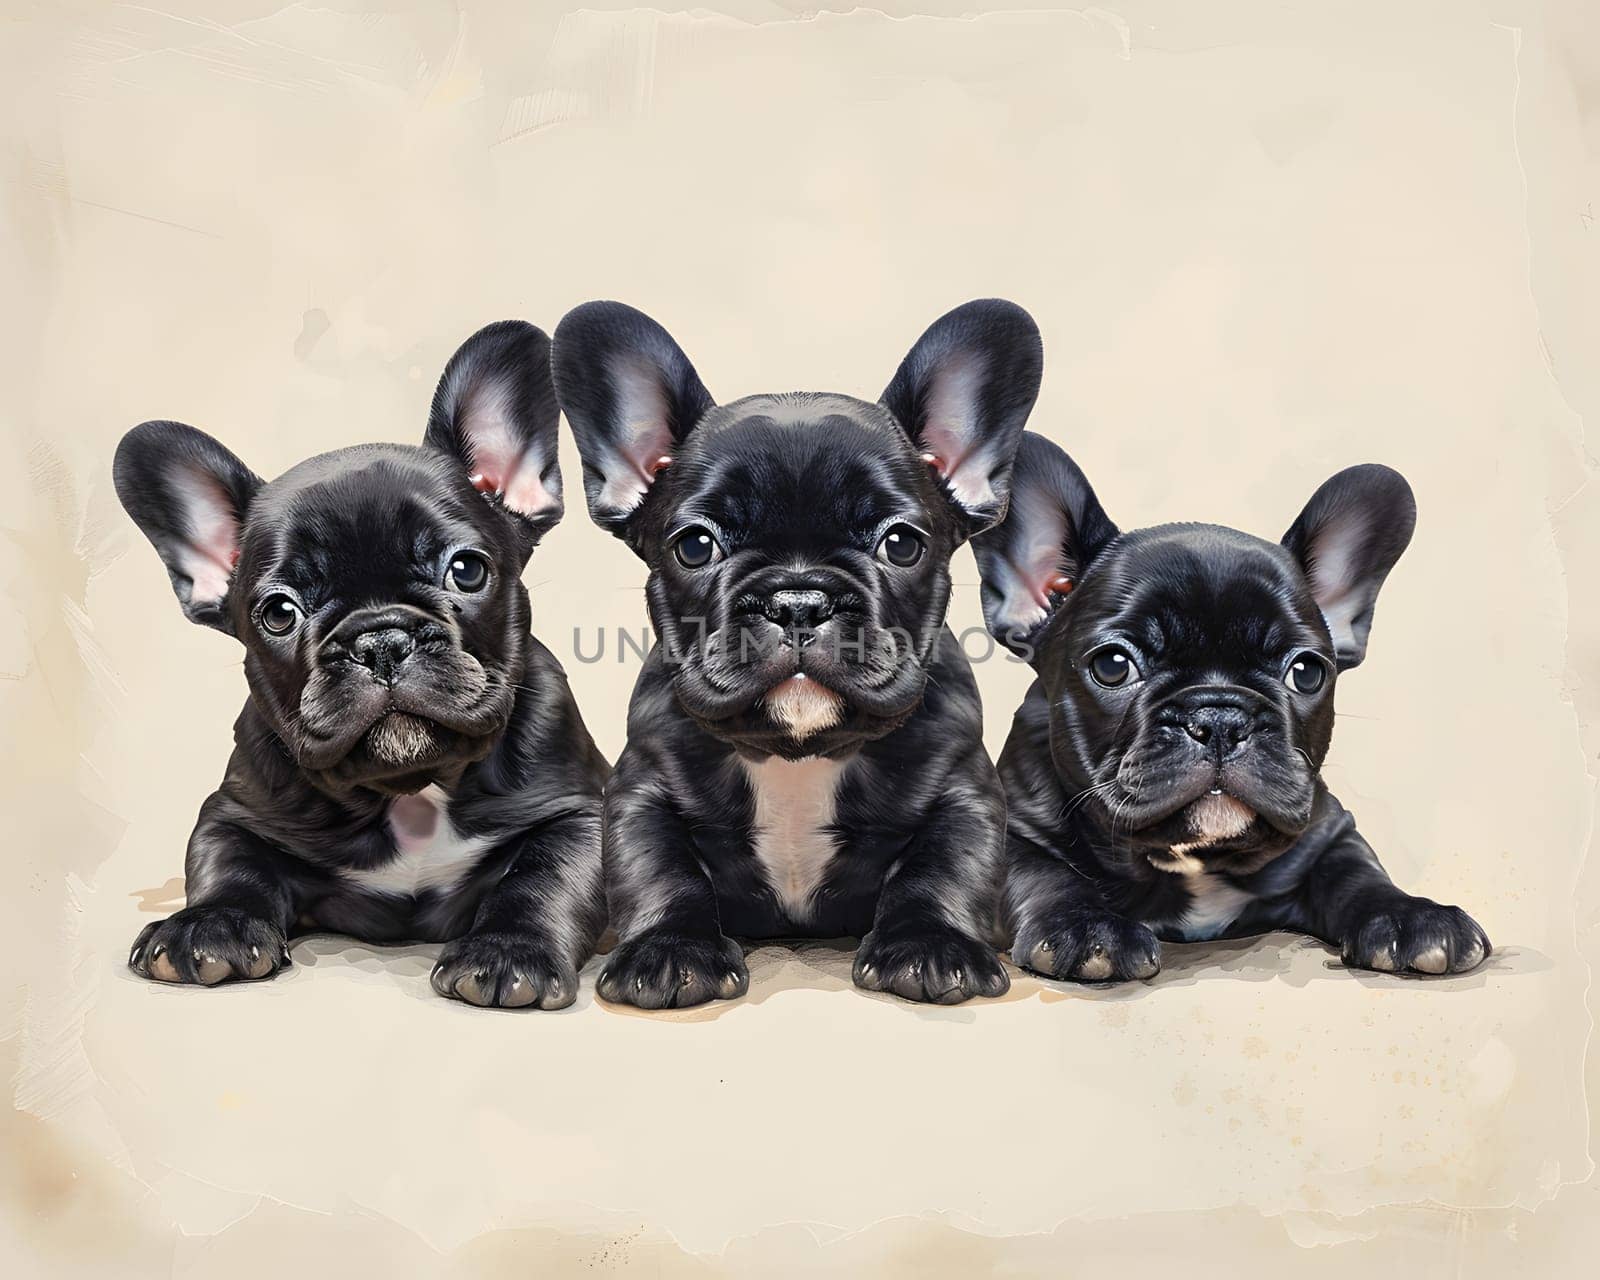 Three black French Bulldogs are lounging together on a beige surface. These carnivorous working animals are a popular companion dog breed, known for their fawn coats and distinctive ears and snouts